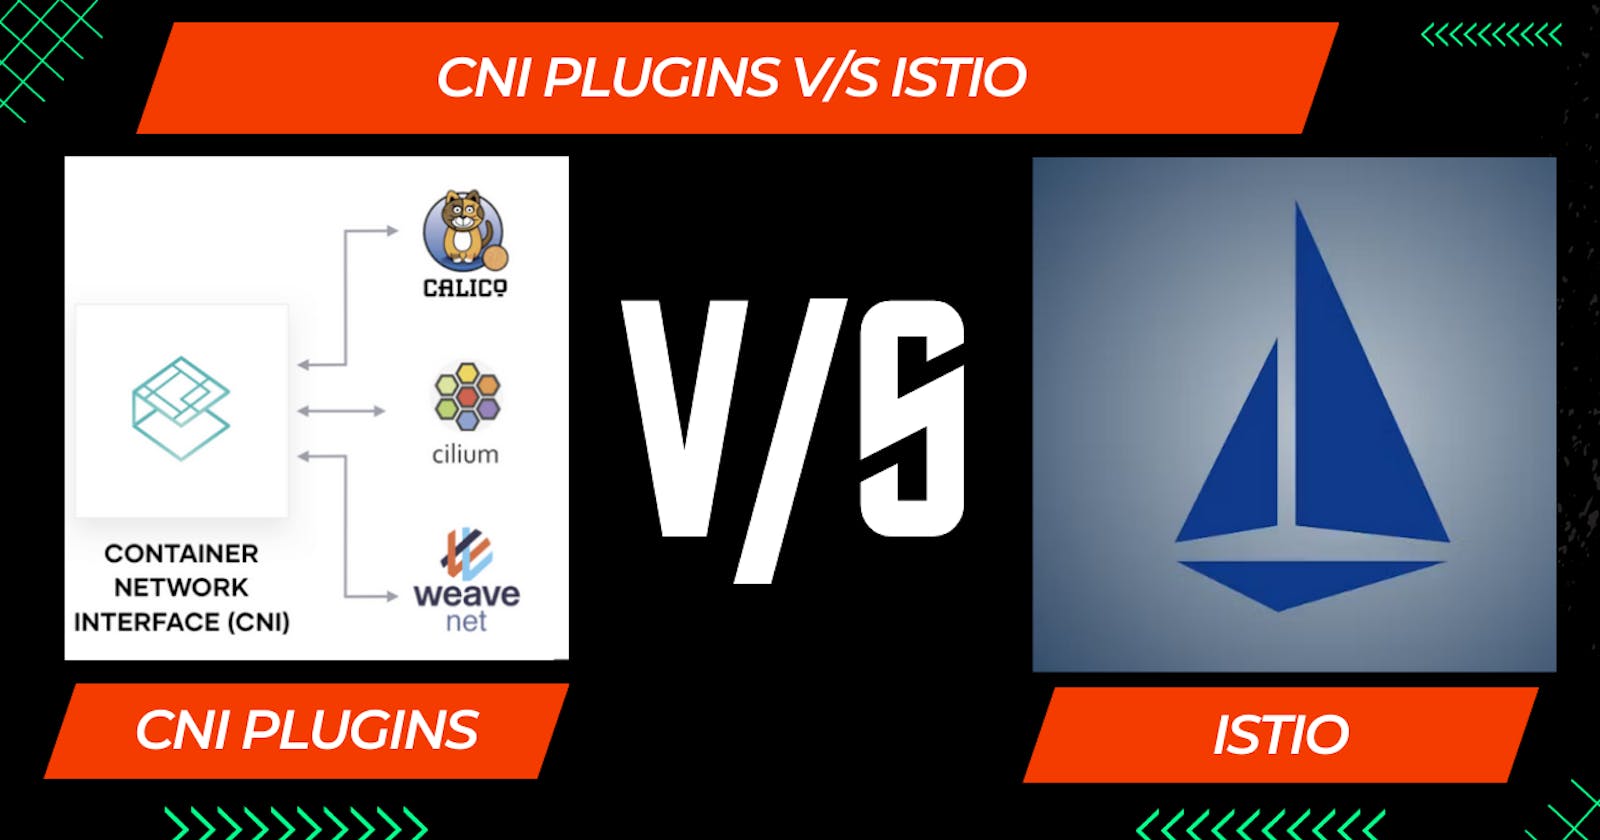 World of Networking in Kubernetes: CNI Plugins vs. Istio 🌐